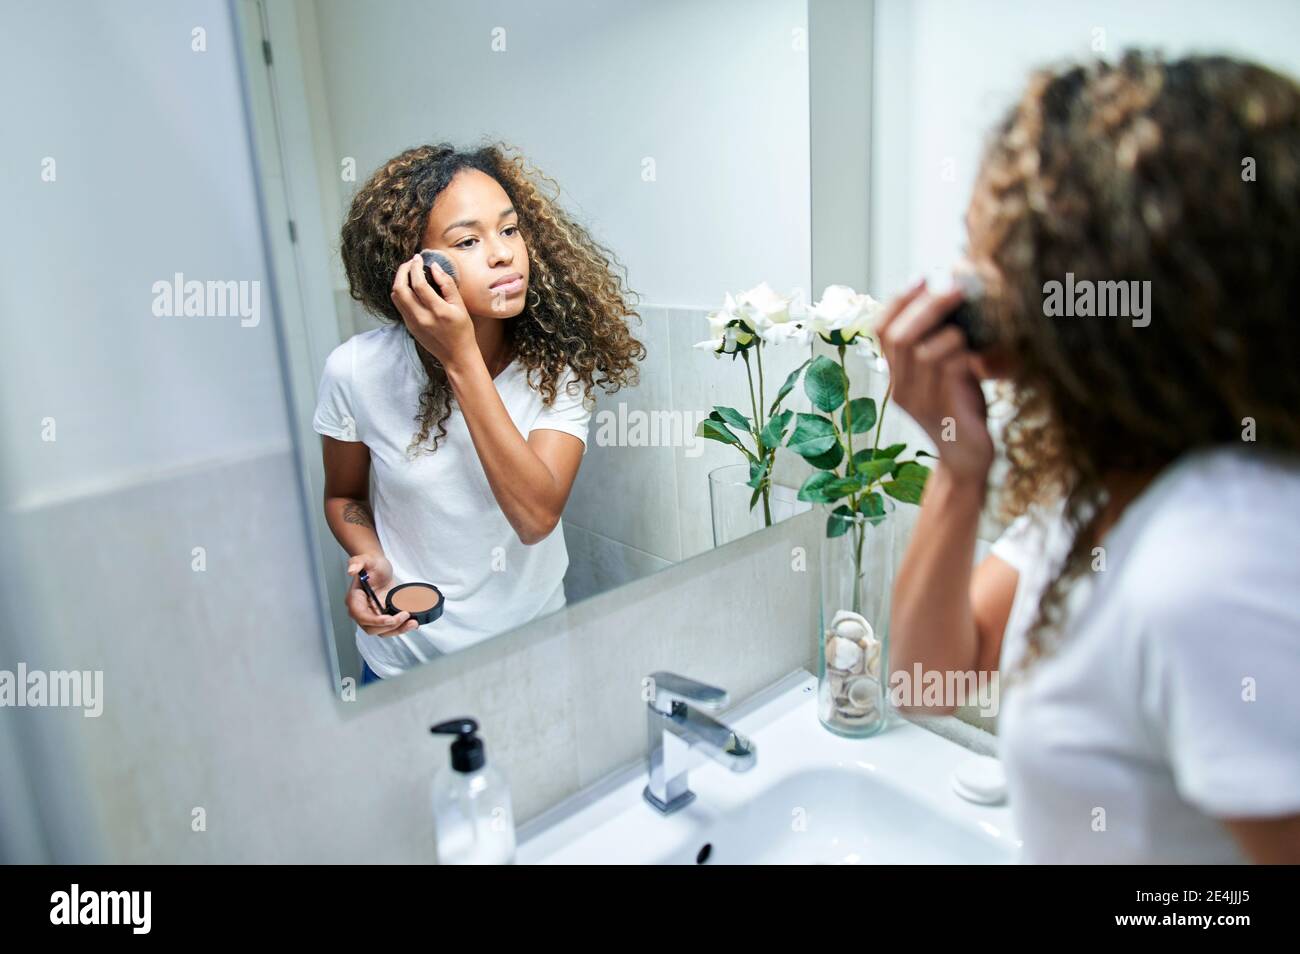 Young woman applying face powder with make-up brush while looking at mirror reflection in bathroom Stock Photo